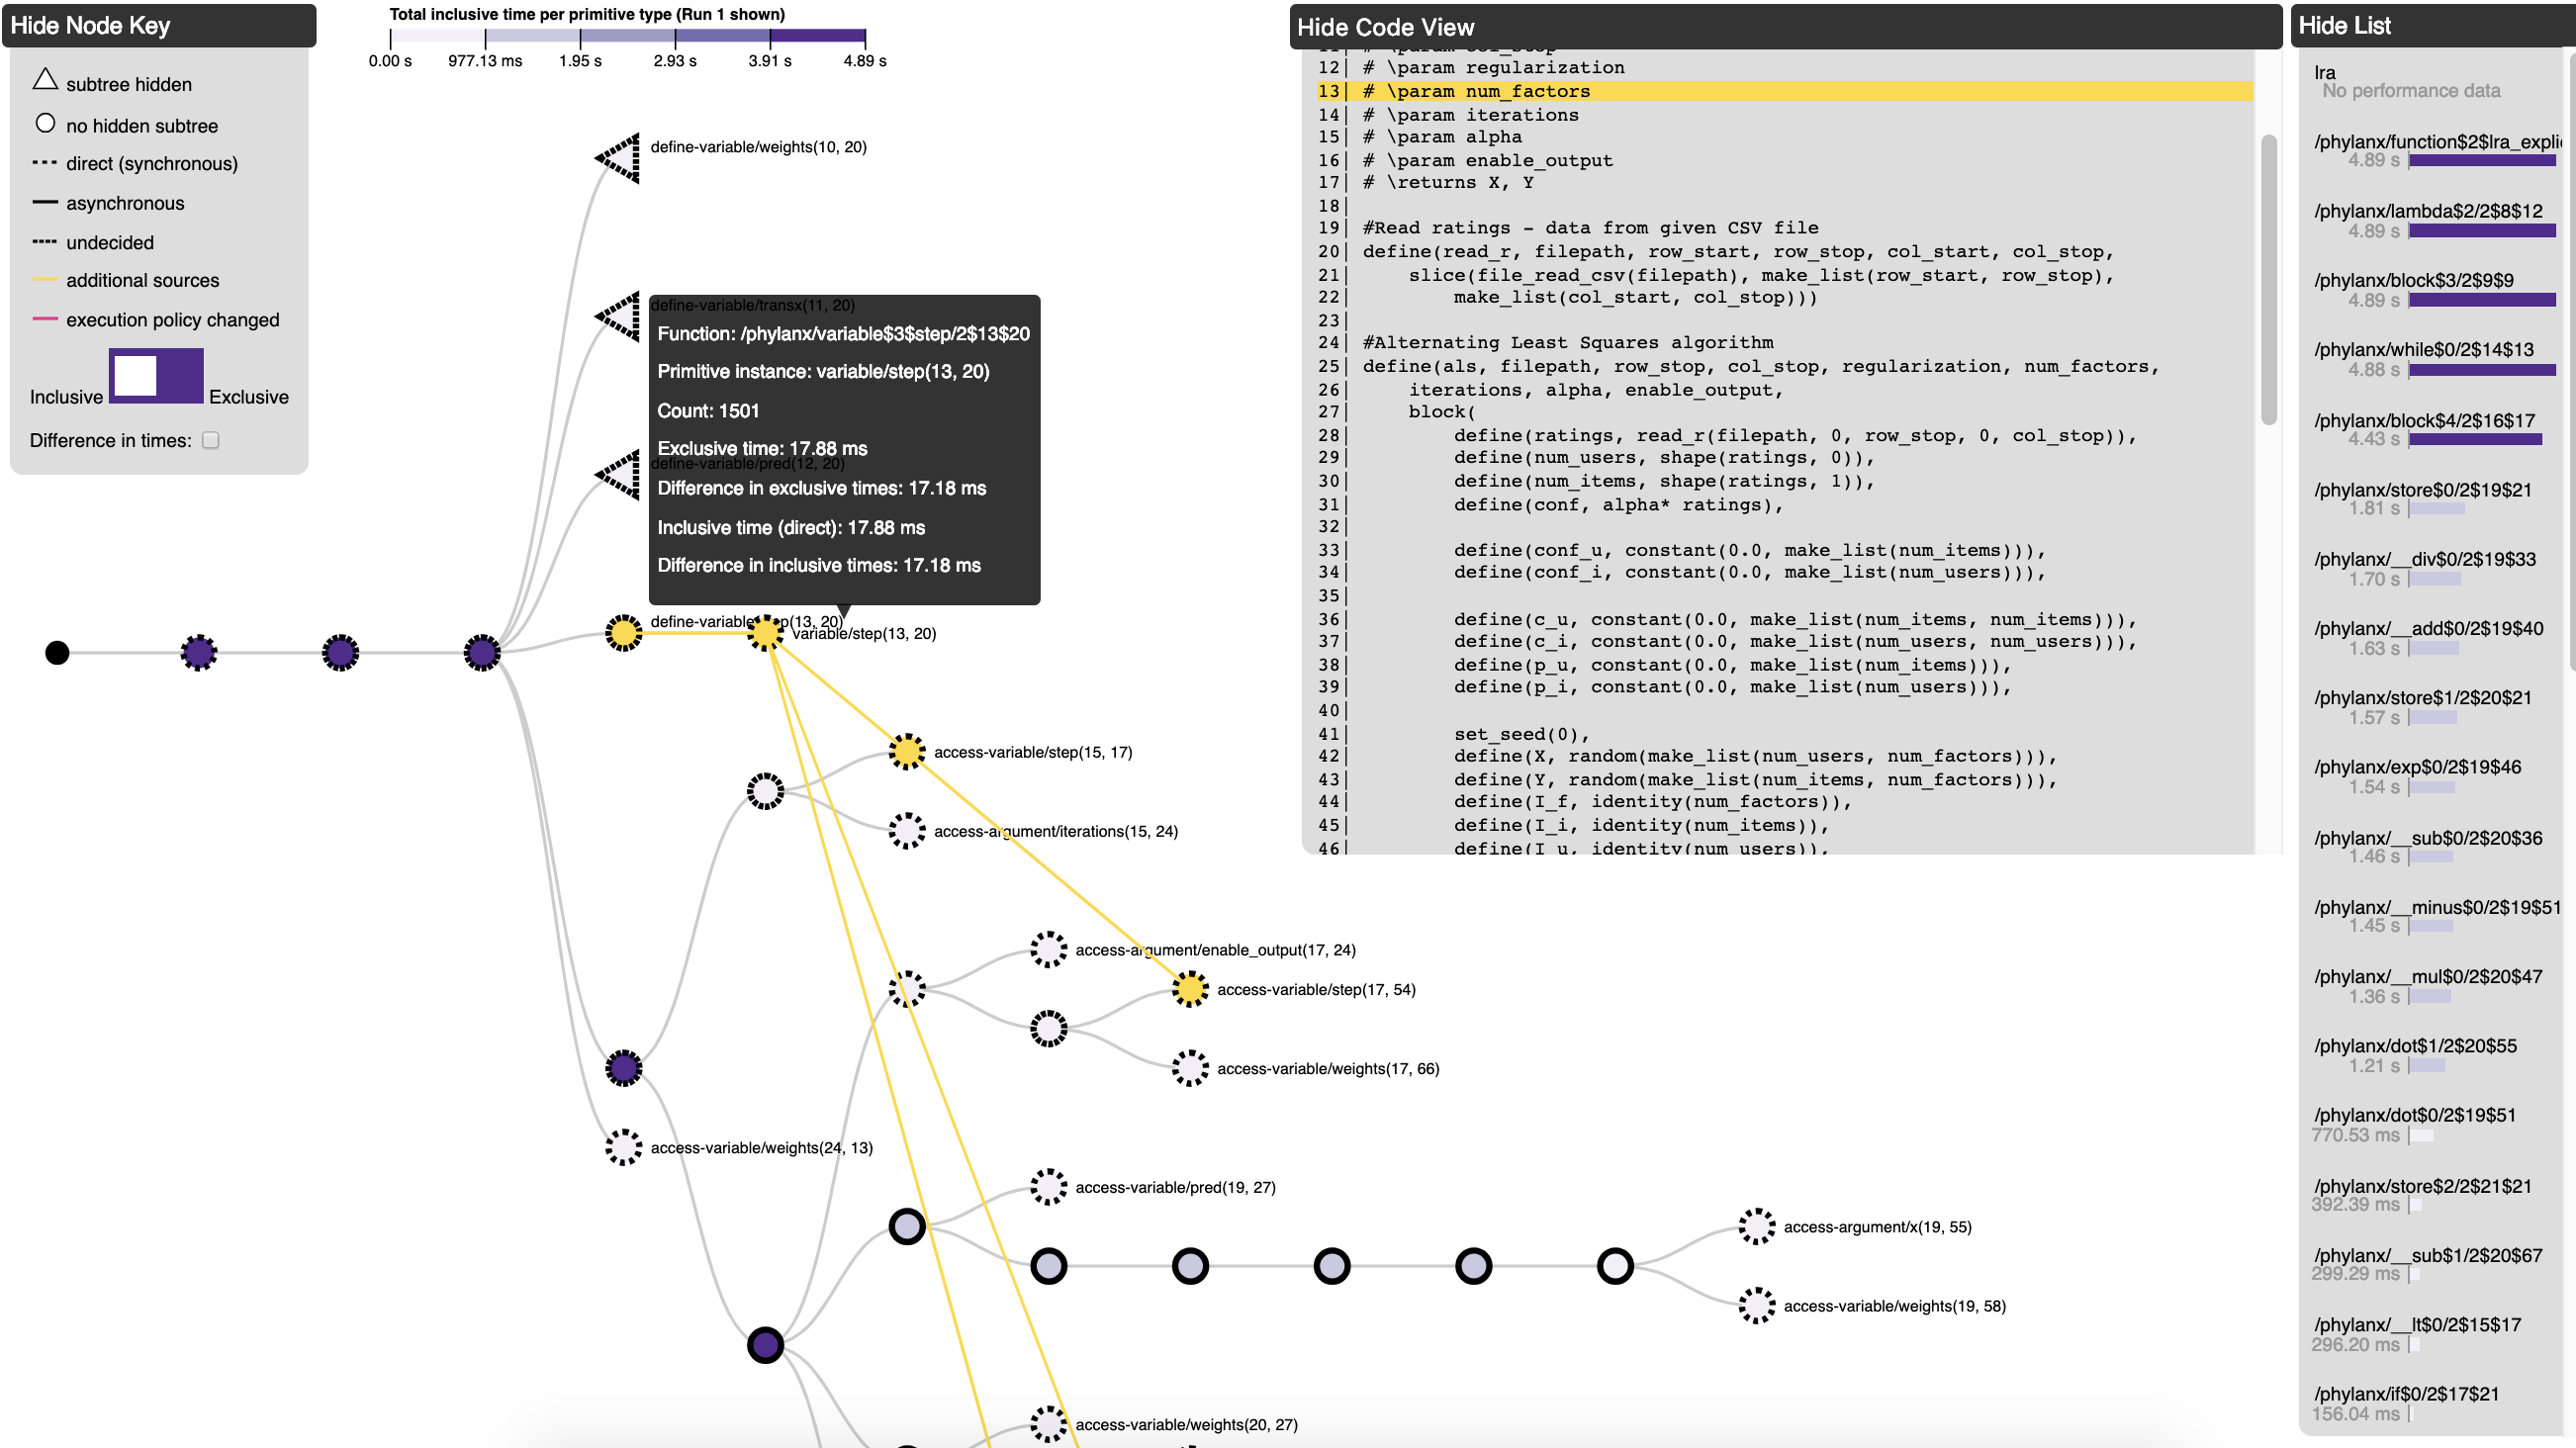 The full Atria visualization, with an expression graph, code view, and list of nodes ranked from slowest to fastest.